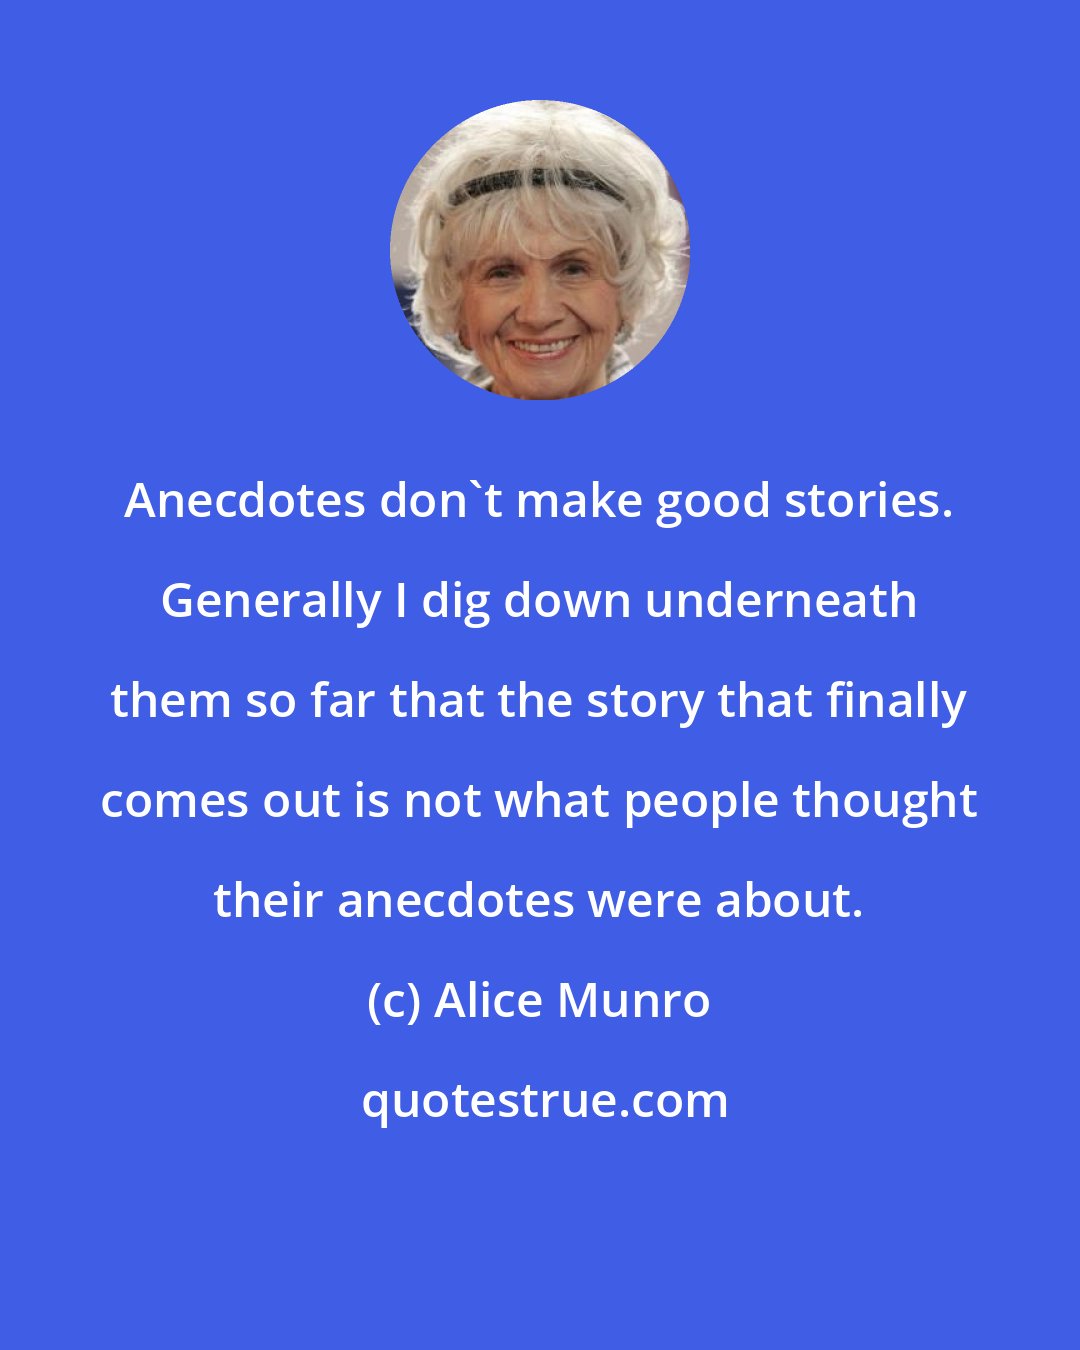 Alice Munro: Anecdotes don't make good stories. Generally I dig down underneath them so far that the story that finally comes out is not what people thought their anecdotes were about.